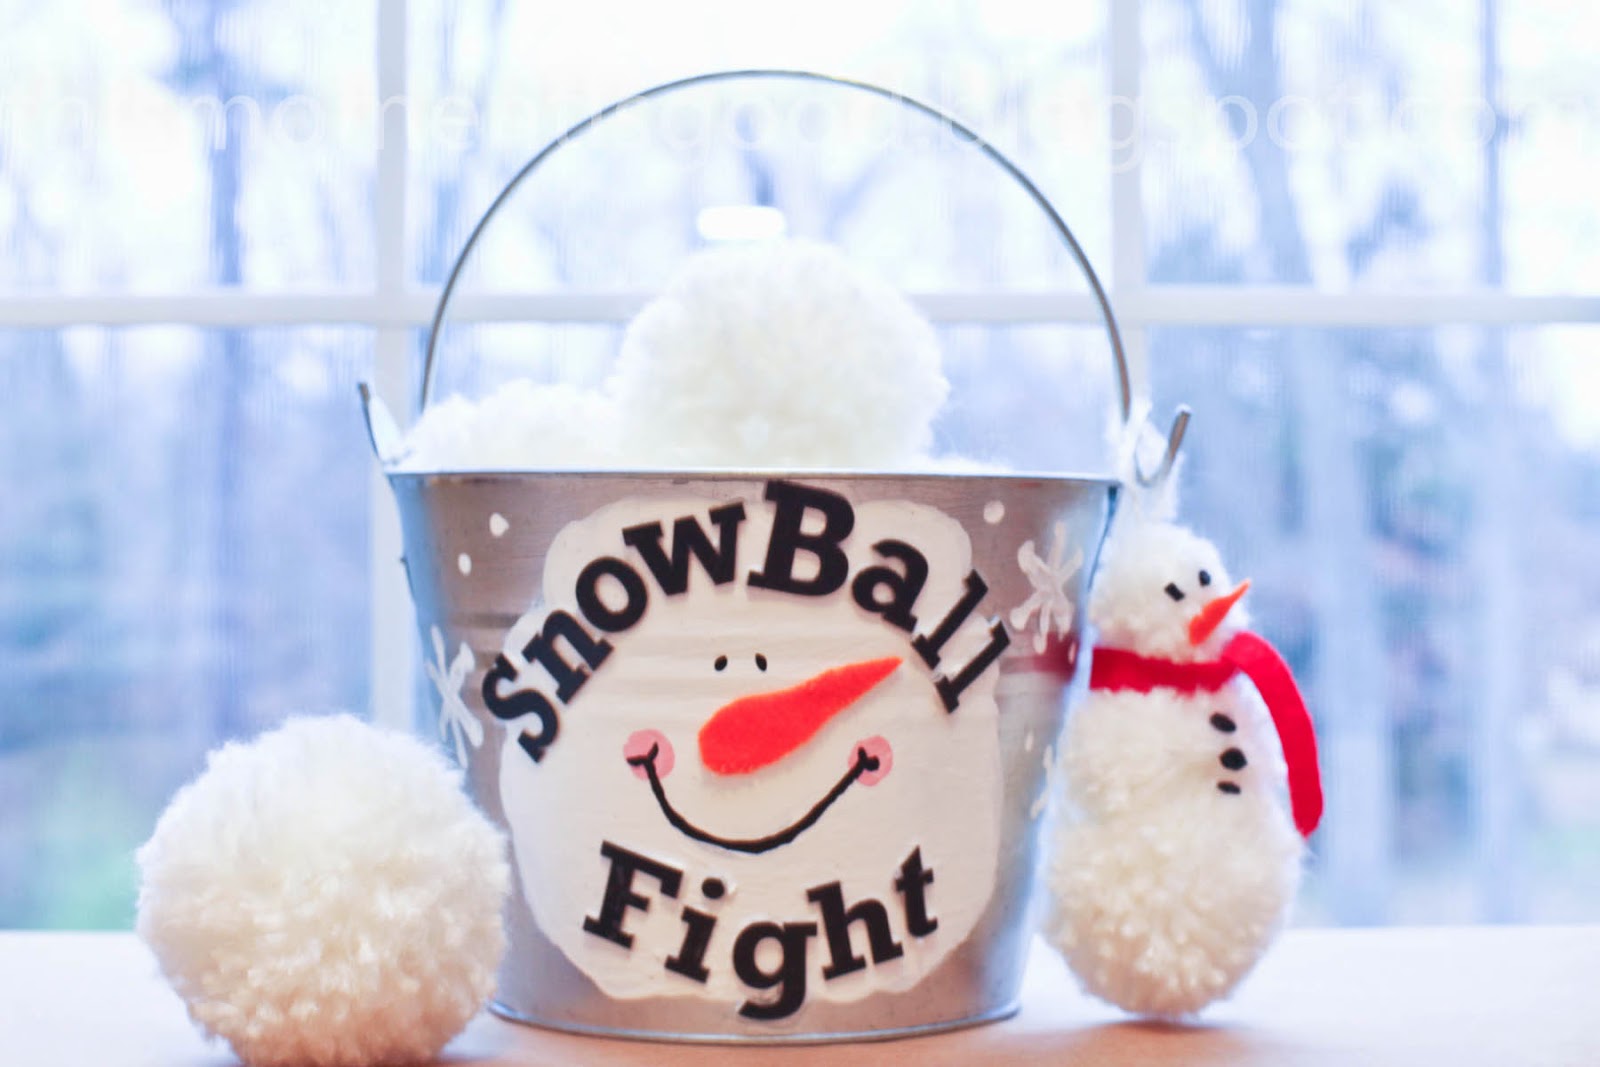 Loom Knitting by This Moment is Good!: SNOWBALL FIGHT IN A BUCKET